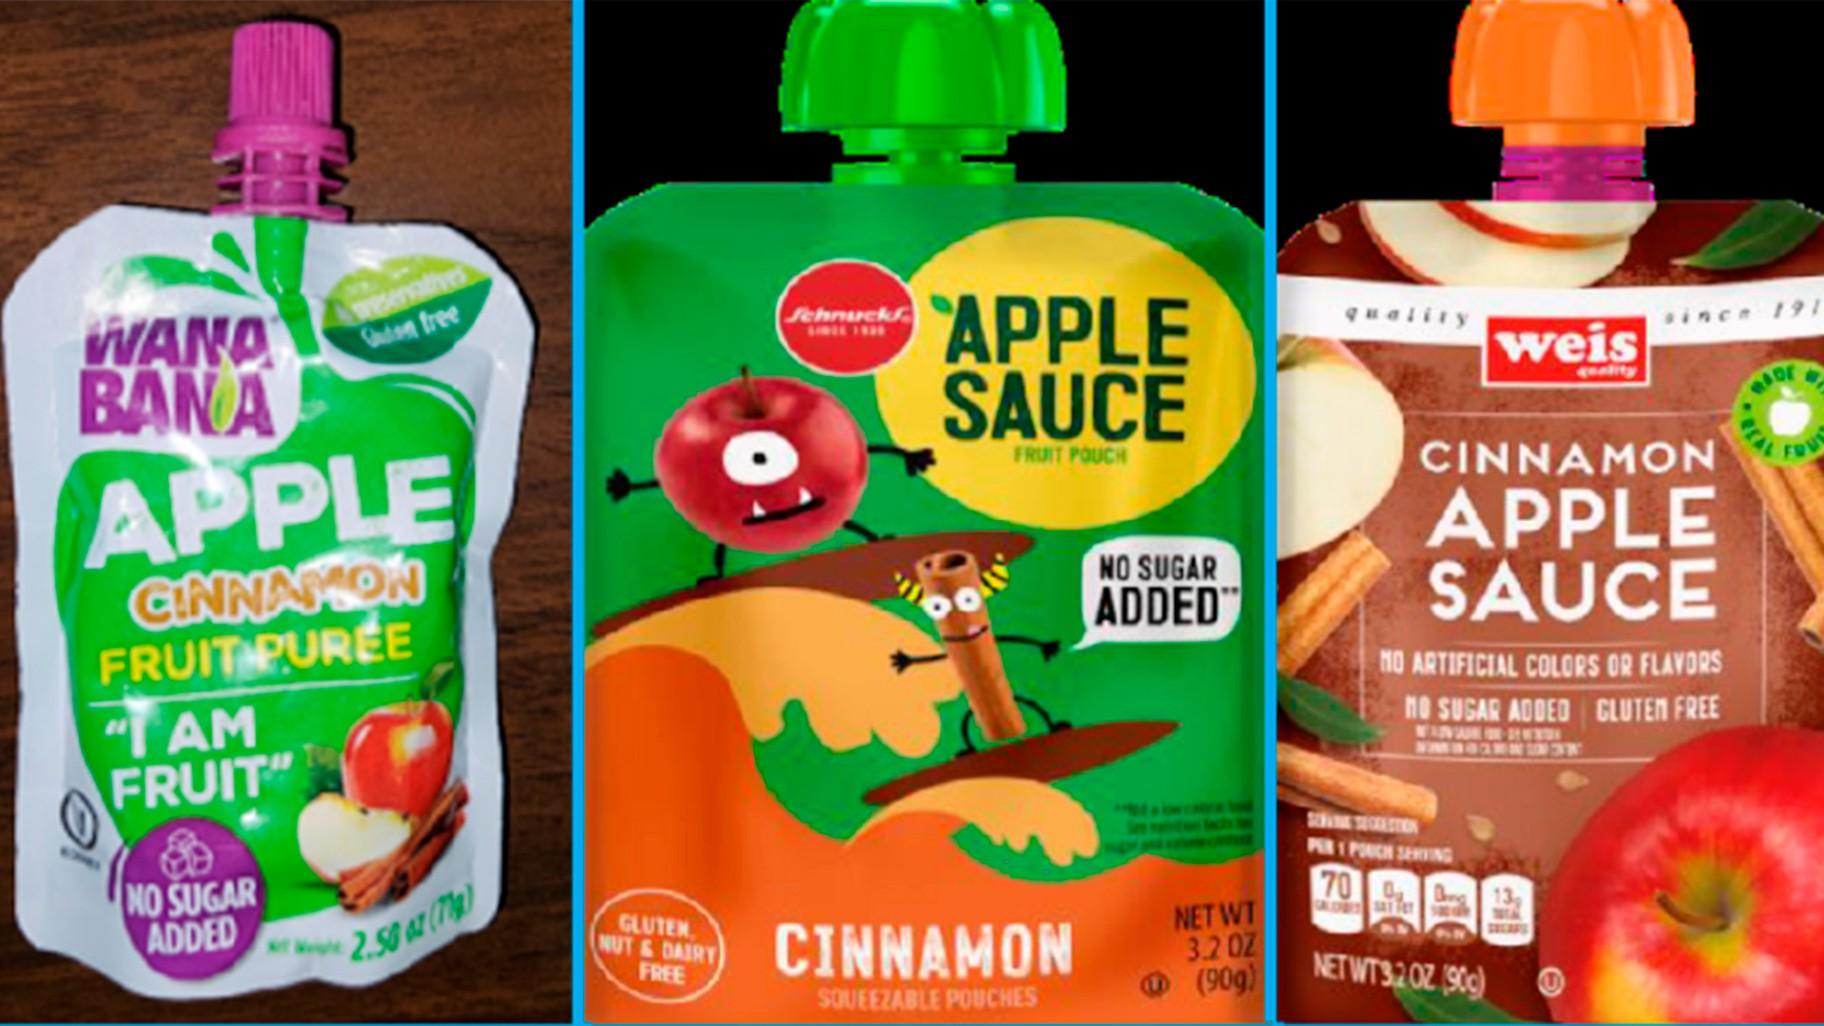 This image provided by the U.S. Food and Drug Administration on Nov. 17, 2023, shows three recalled applesauce products - WanaBana apple cinnamon fruit puree pouches, Schnucks-brand cinnamon-flavored applesauce pouches and variety pack, and Weis-brand cinnamon applesauce pouches. (FDA via AP, File)